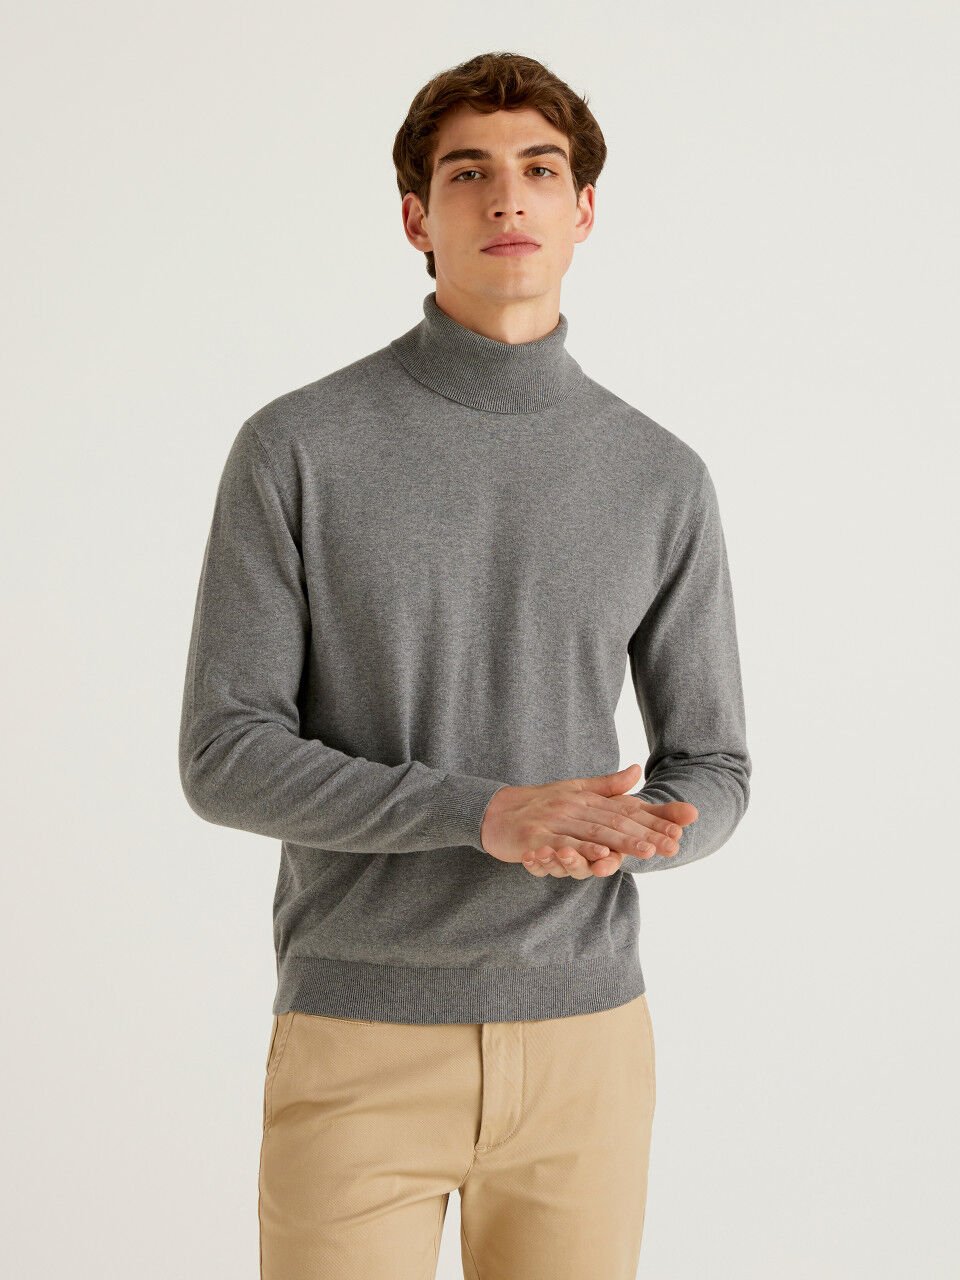 Men's High Neck Sweaters New Collection 2022 | Benetton